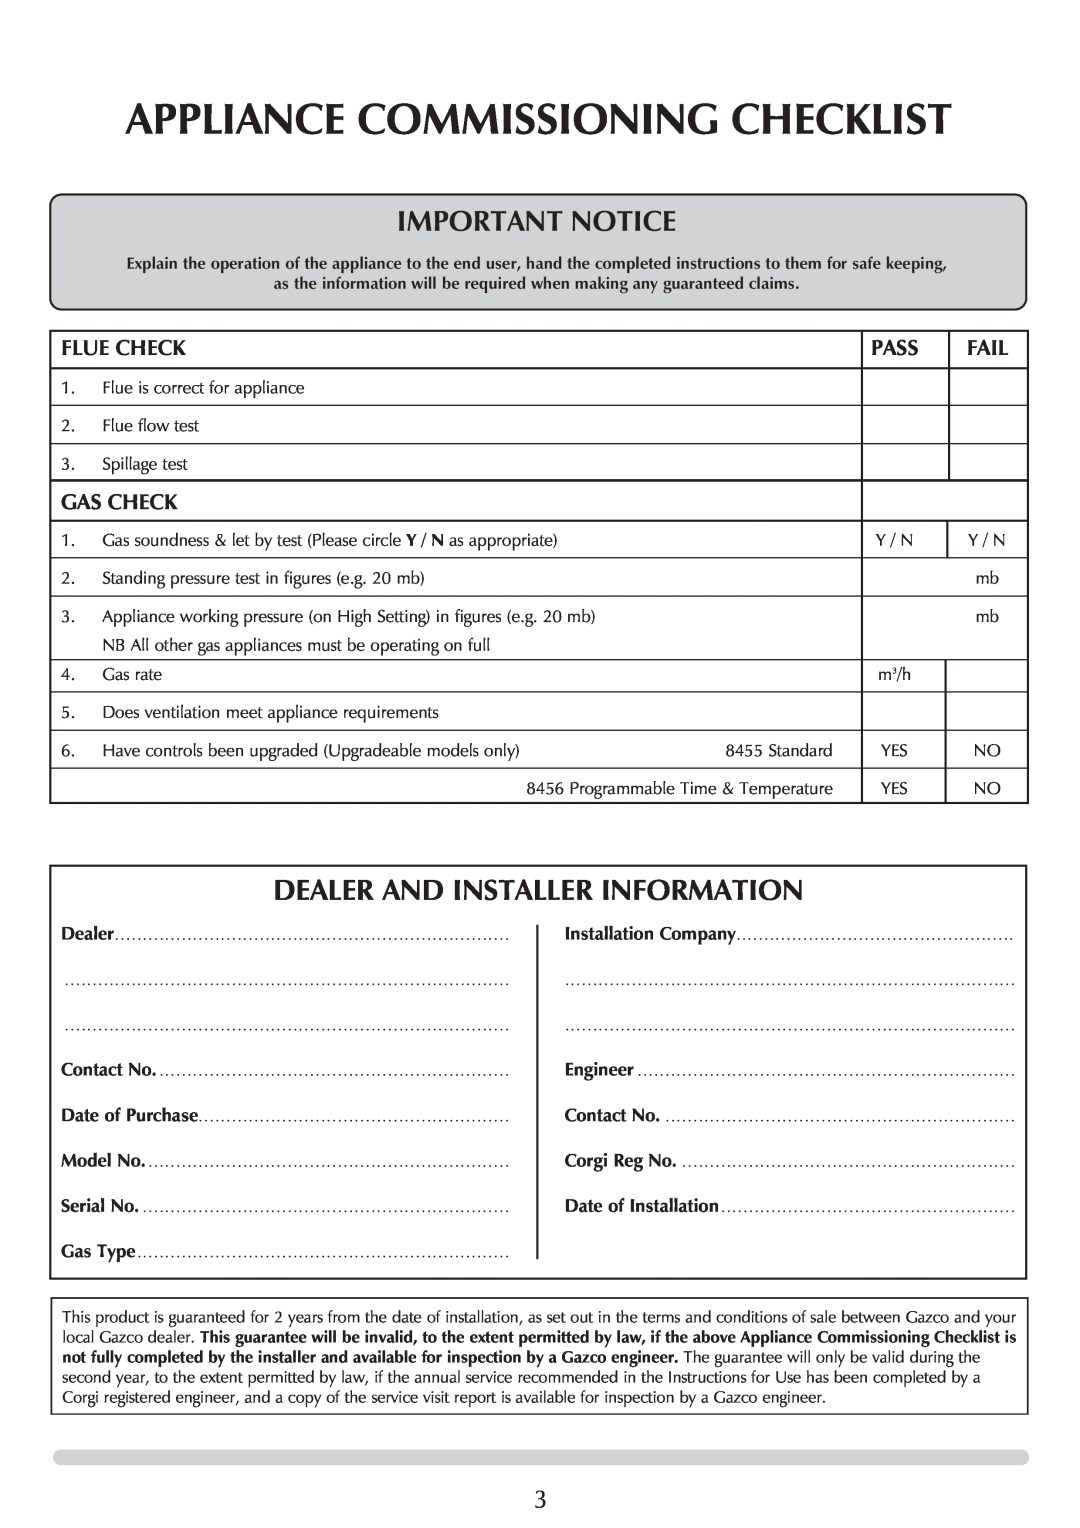 Stovax P8574, Marlborough 8560, P8564 Appliance Commissioning Checklist, Important Notice, Dealer And Installer Information 